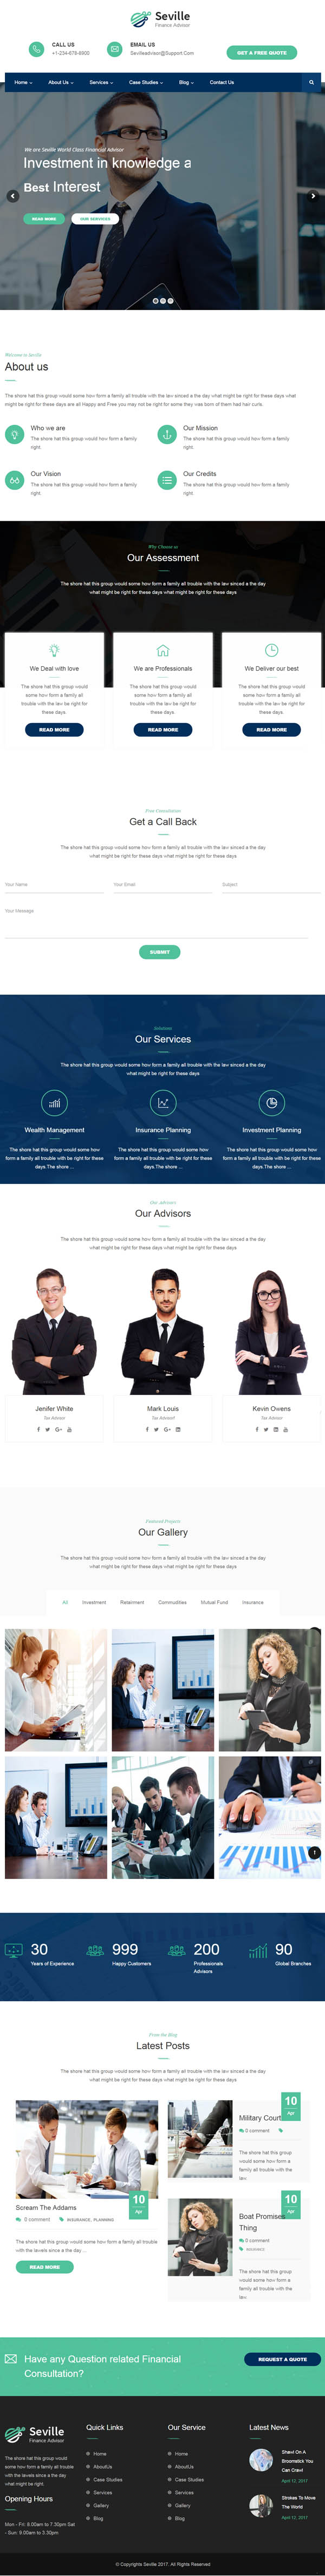 Seville -Business Consulting and Professional Services WordPress Theme